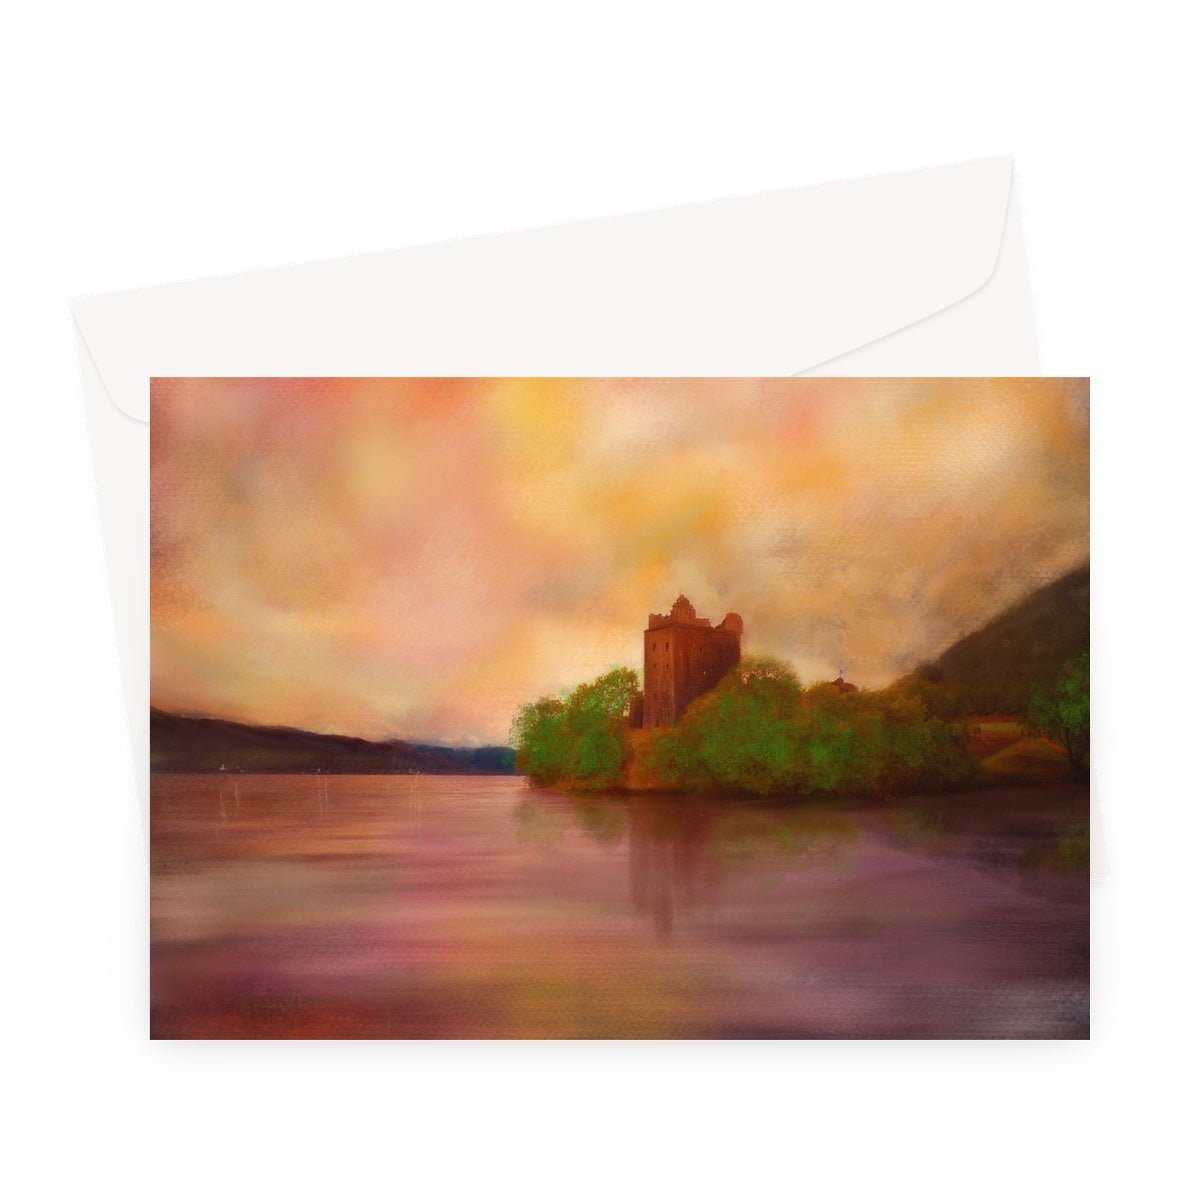 Urquhart Castle Art Gifts Greeting Card-Greetings Cards-Scottish Castles Art Gallery-A5 Landscape-1 Card-Paintings, Prints, Homeware, Art Gifts From Scotland By Scottish Artist Kevin Hunter